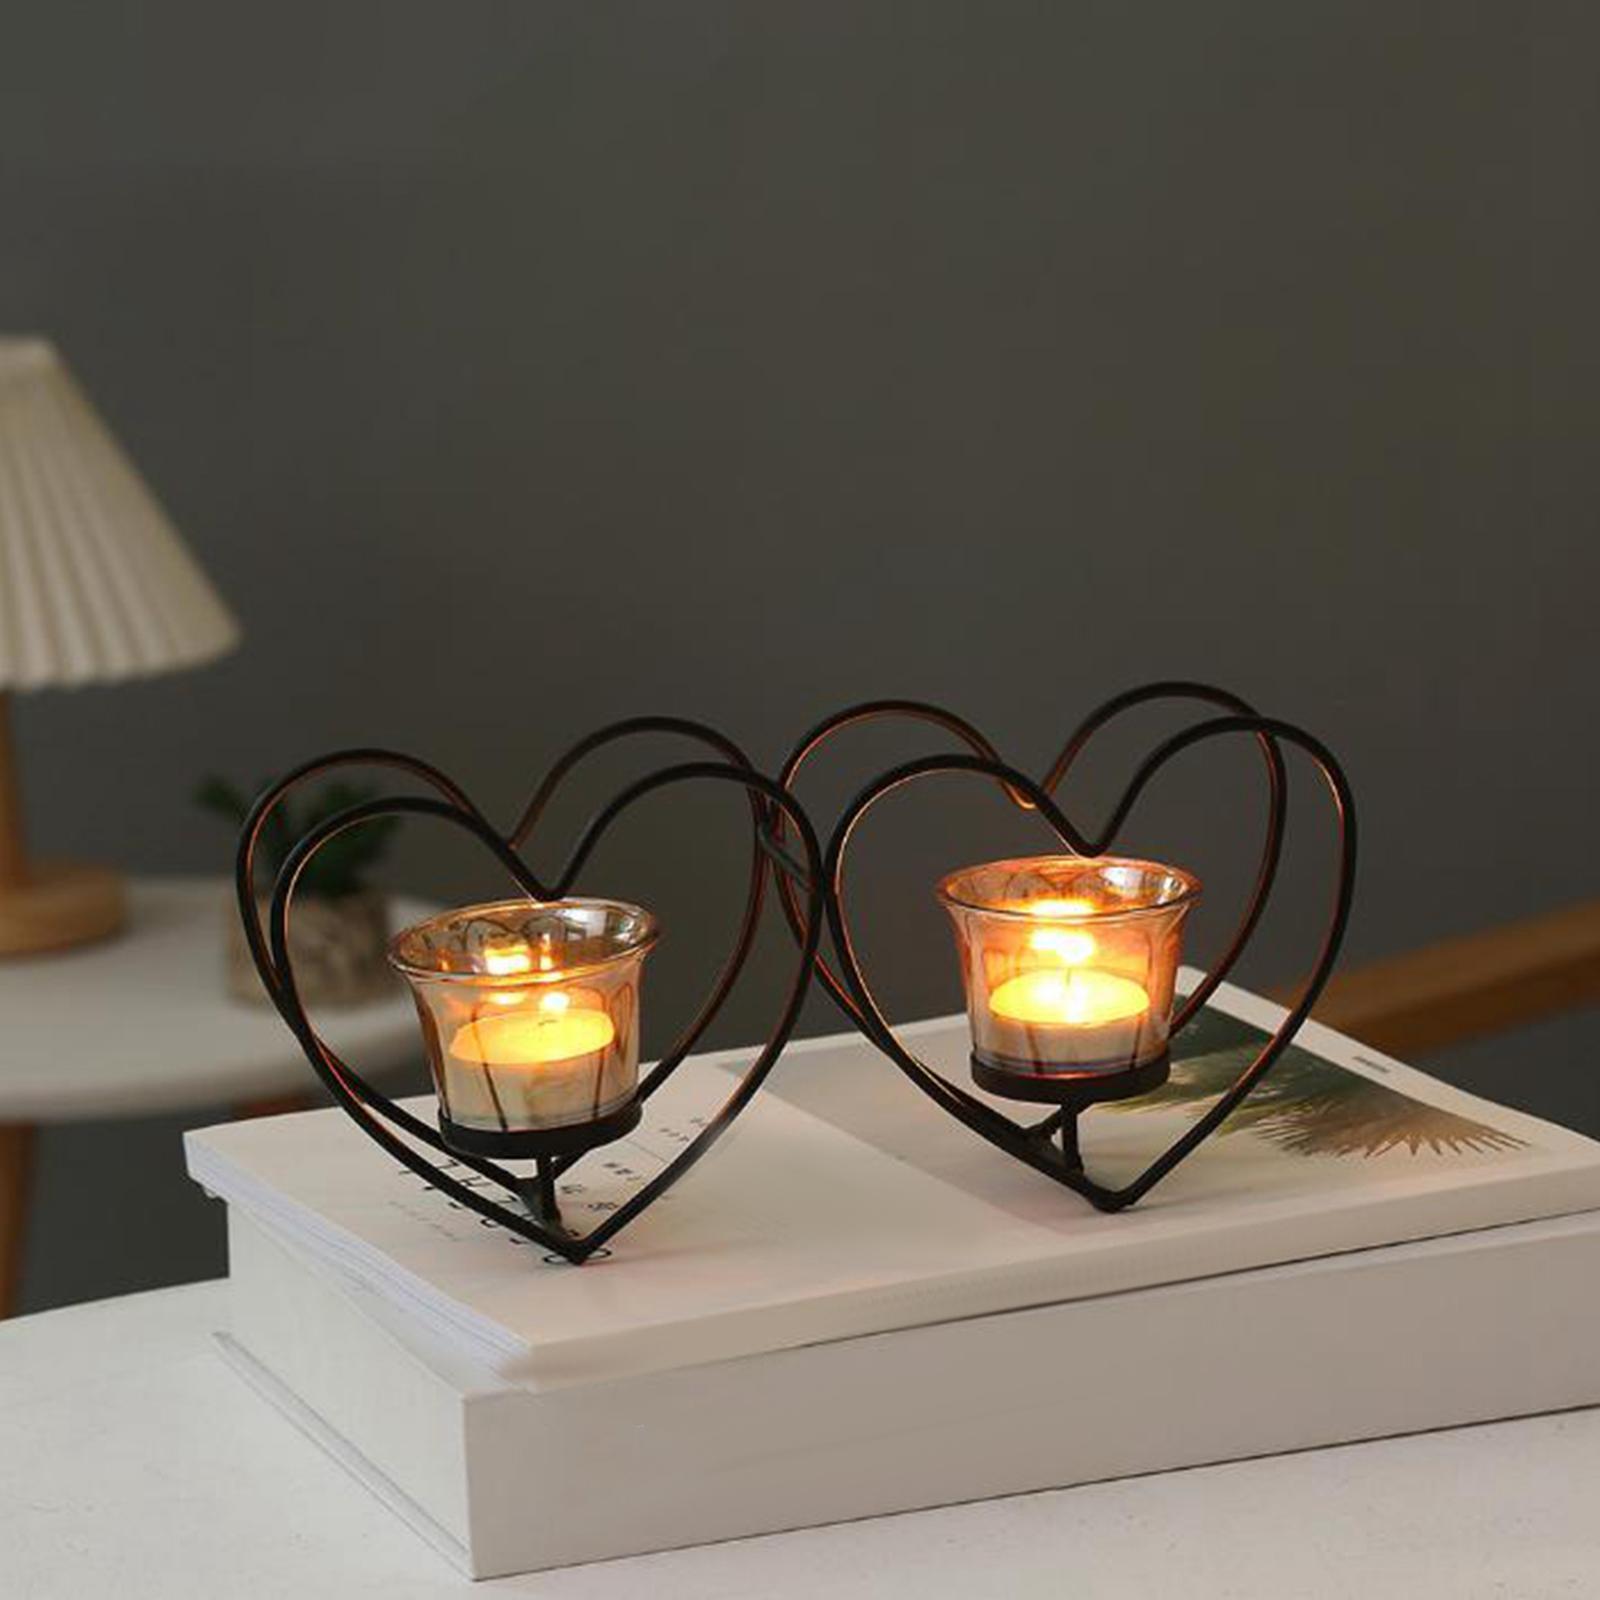 Nordic Heart Candle Holder Tealight Candlestick Decorative Candle Stand Wedding Holiday Table Centerpiece Decor Birthday Gift